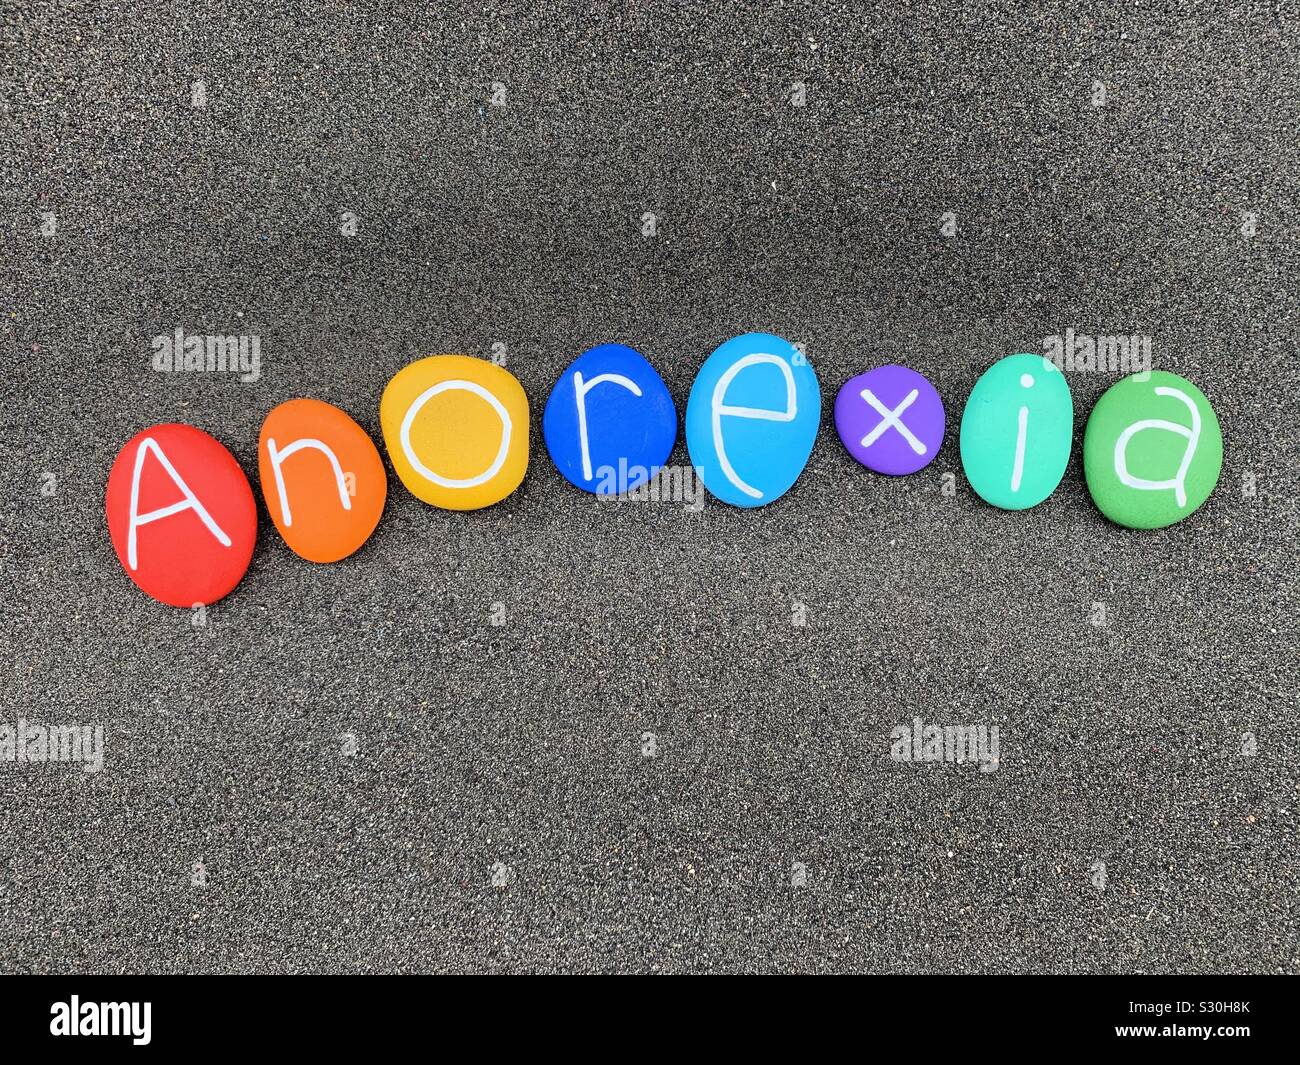 Anorexia, Anorexia nervosa, eating disorder illness name composed with multi colored stone letters over black volcanic sand Stock Photo